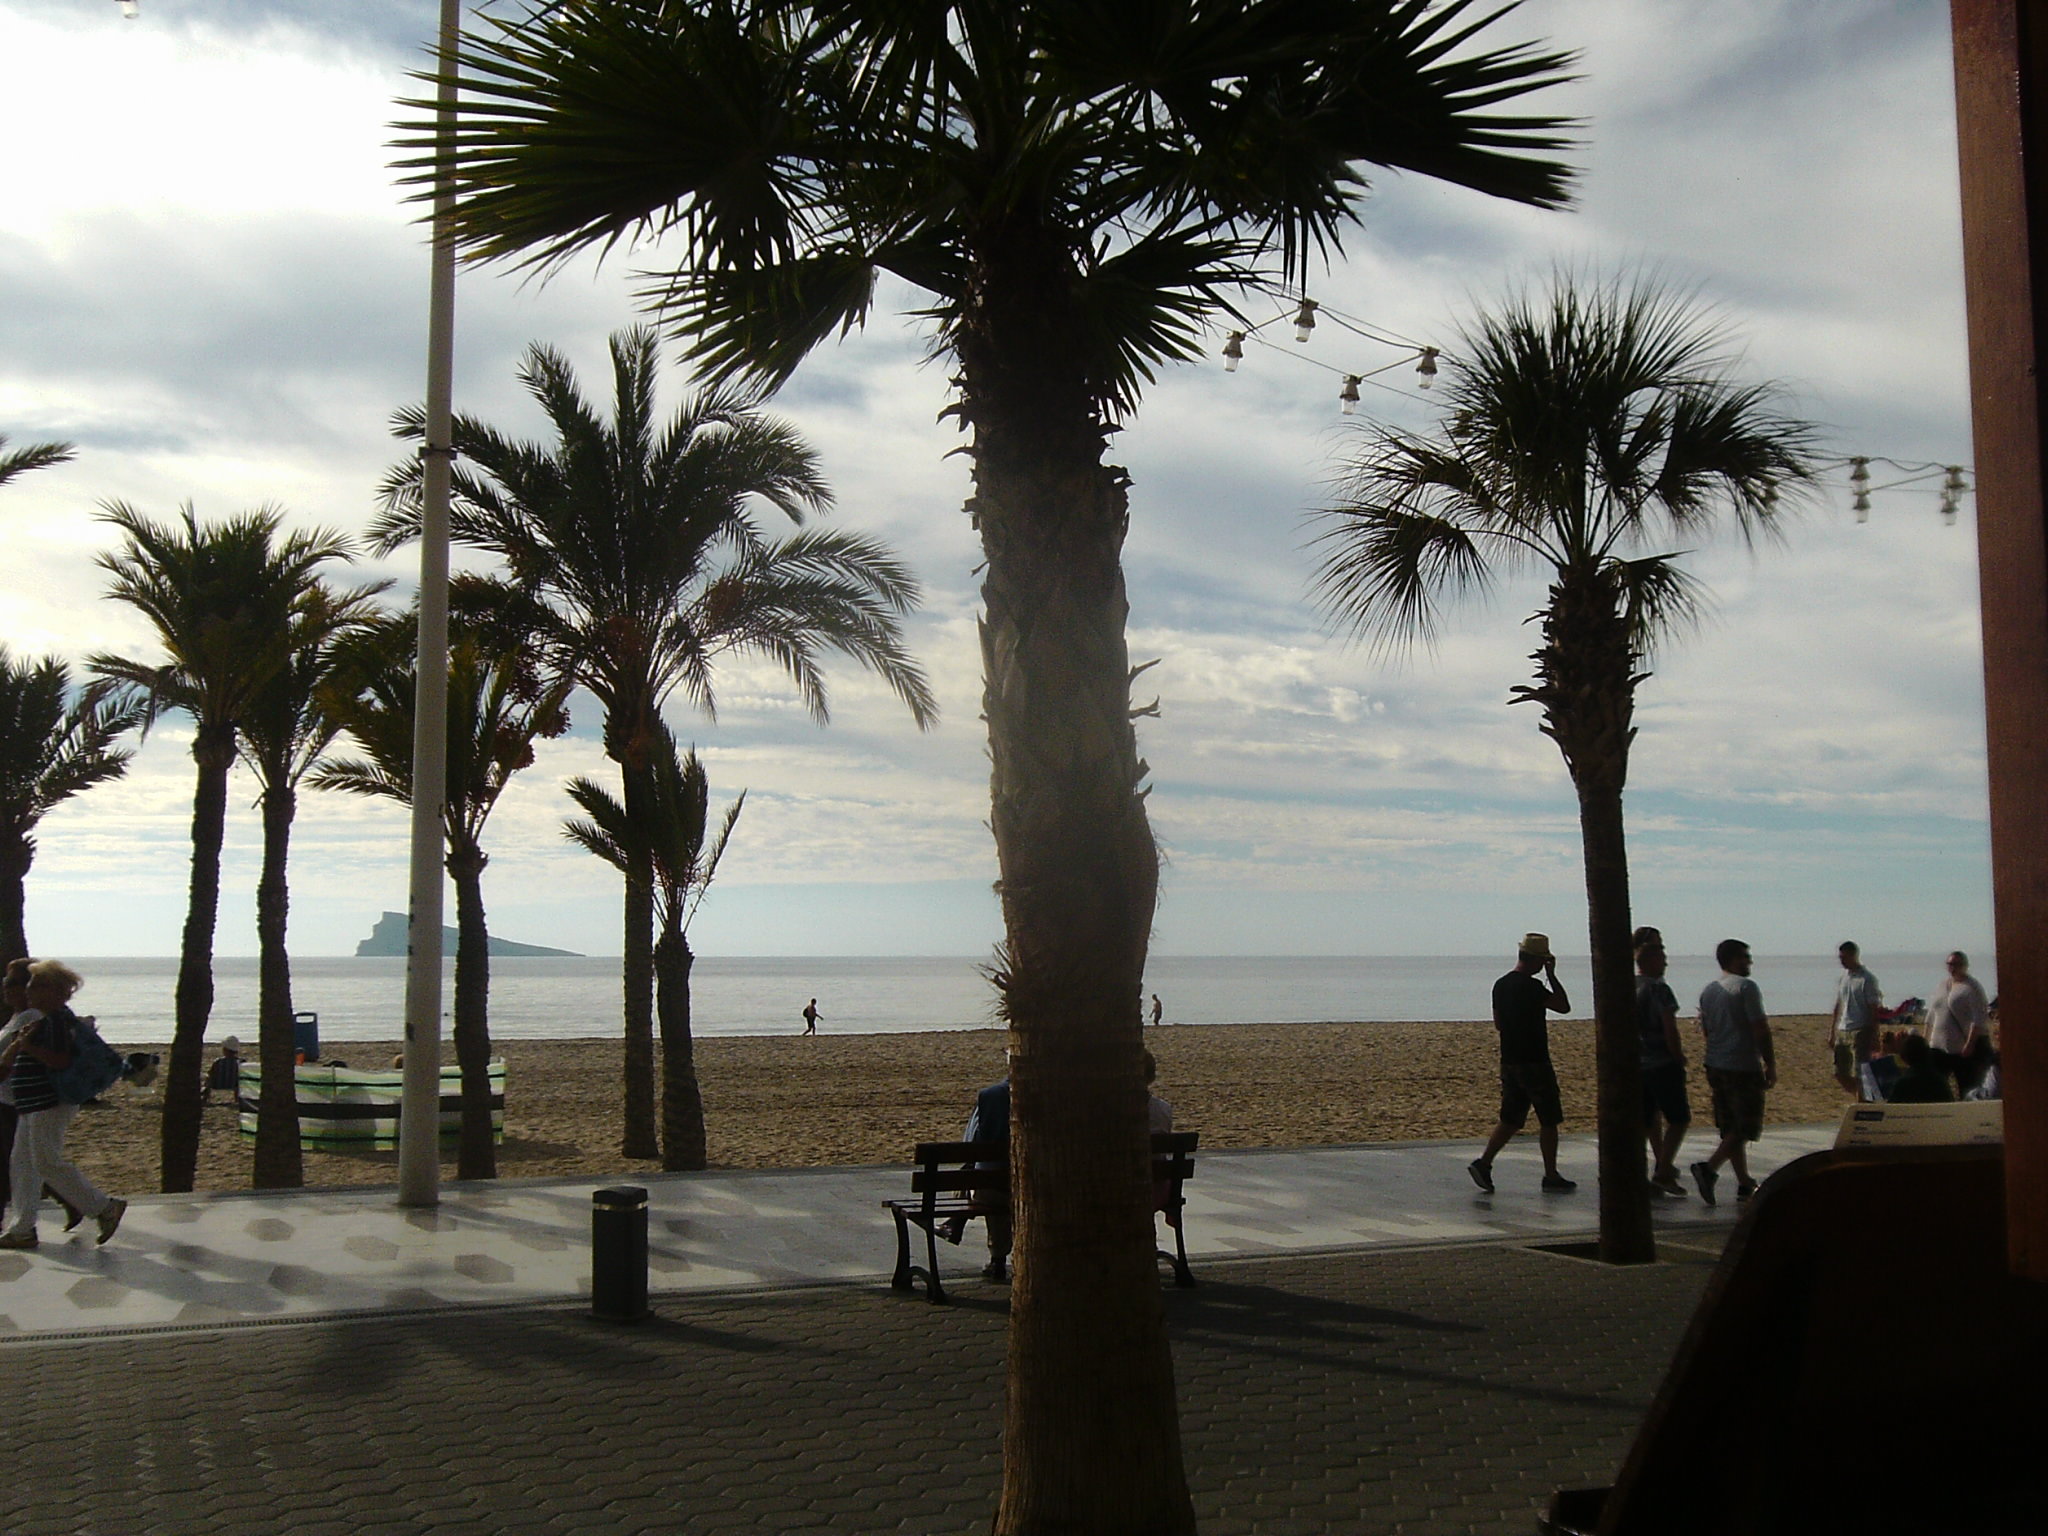 Promenade in Spain - my own picture.